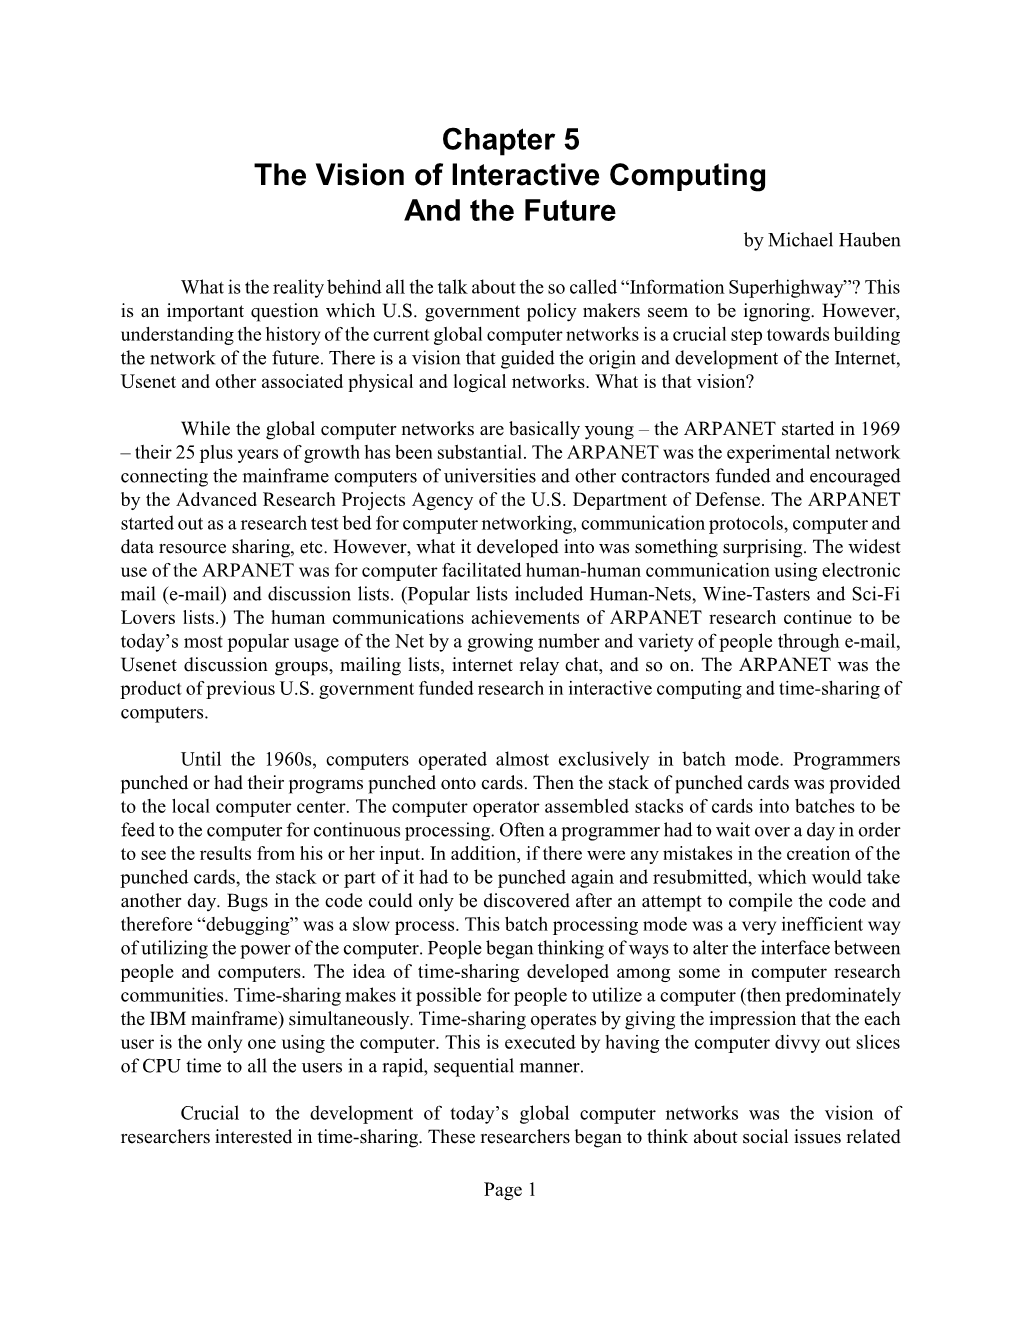 Chapter 5 the Vision of Interactive Computing and the Future by Michael Hauben